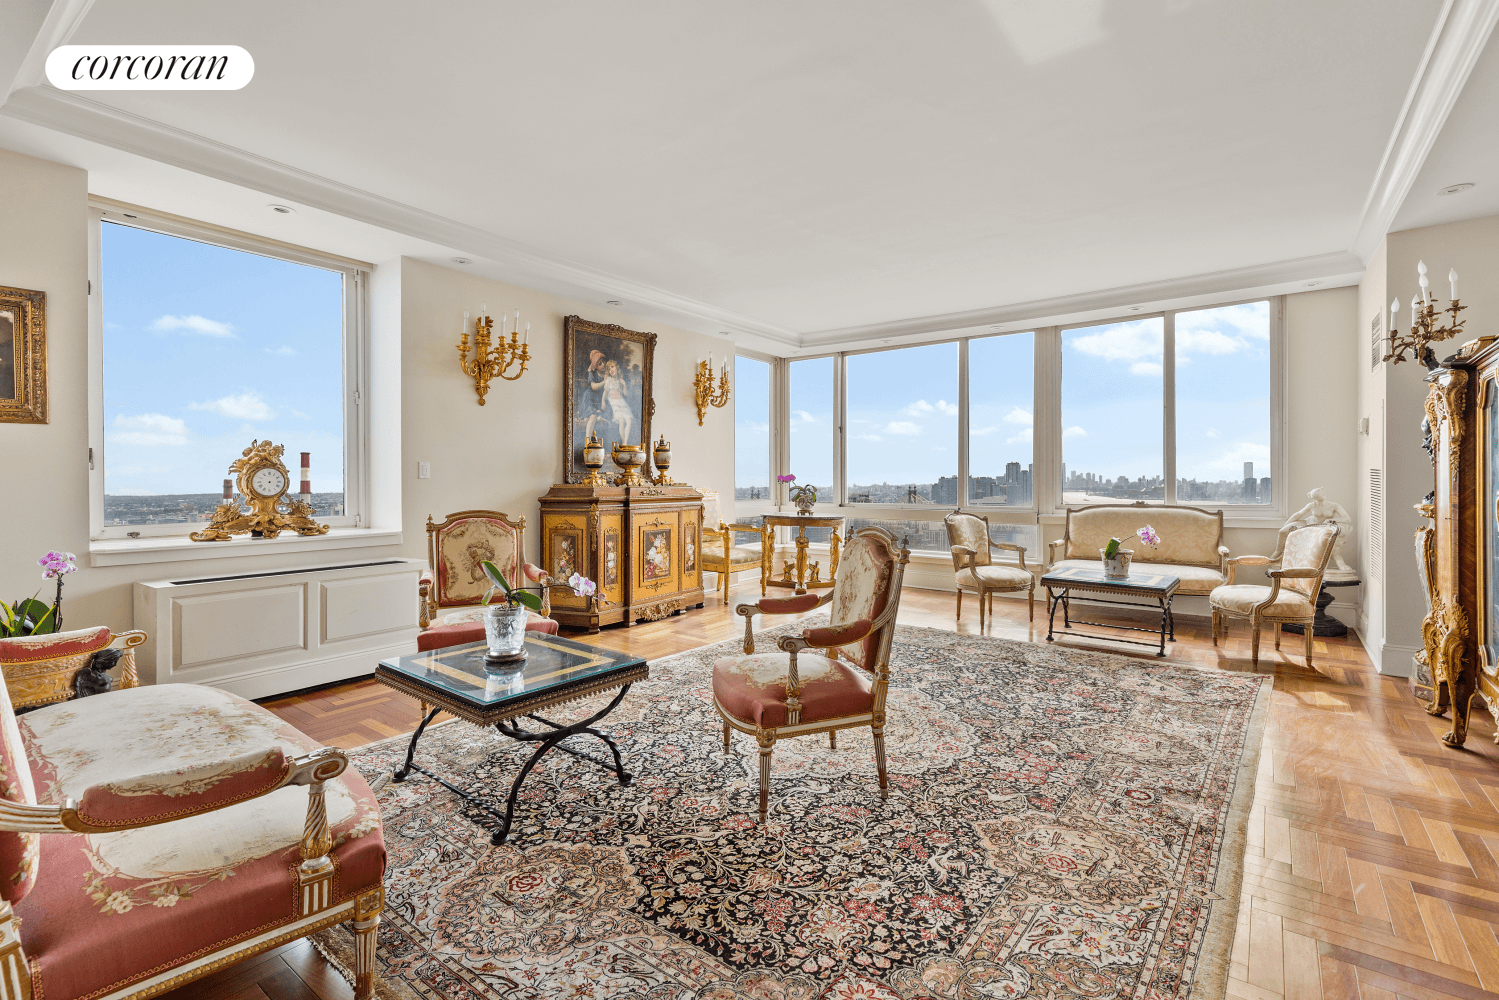 Perched on the 40th floor this magnificent four bedroom, four and a half bathroom sanctuary, boasts lofty ceilings and 13 windows with a triple exposure and endless unobstructed river views.